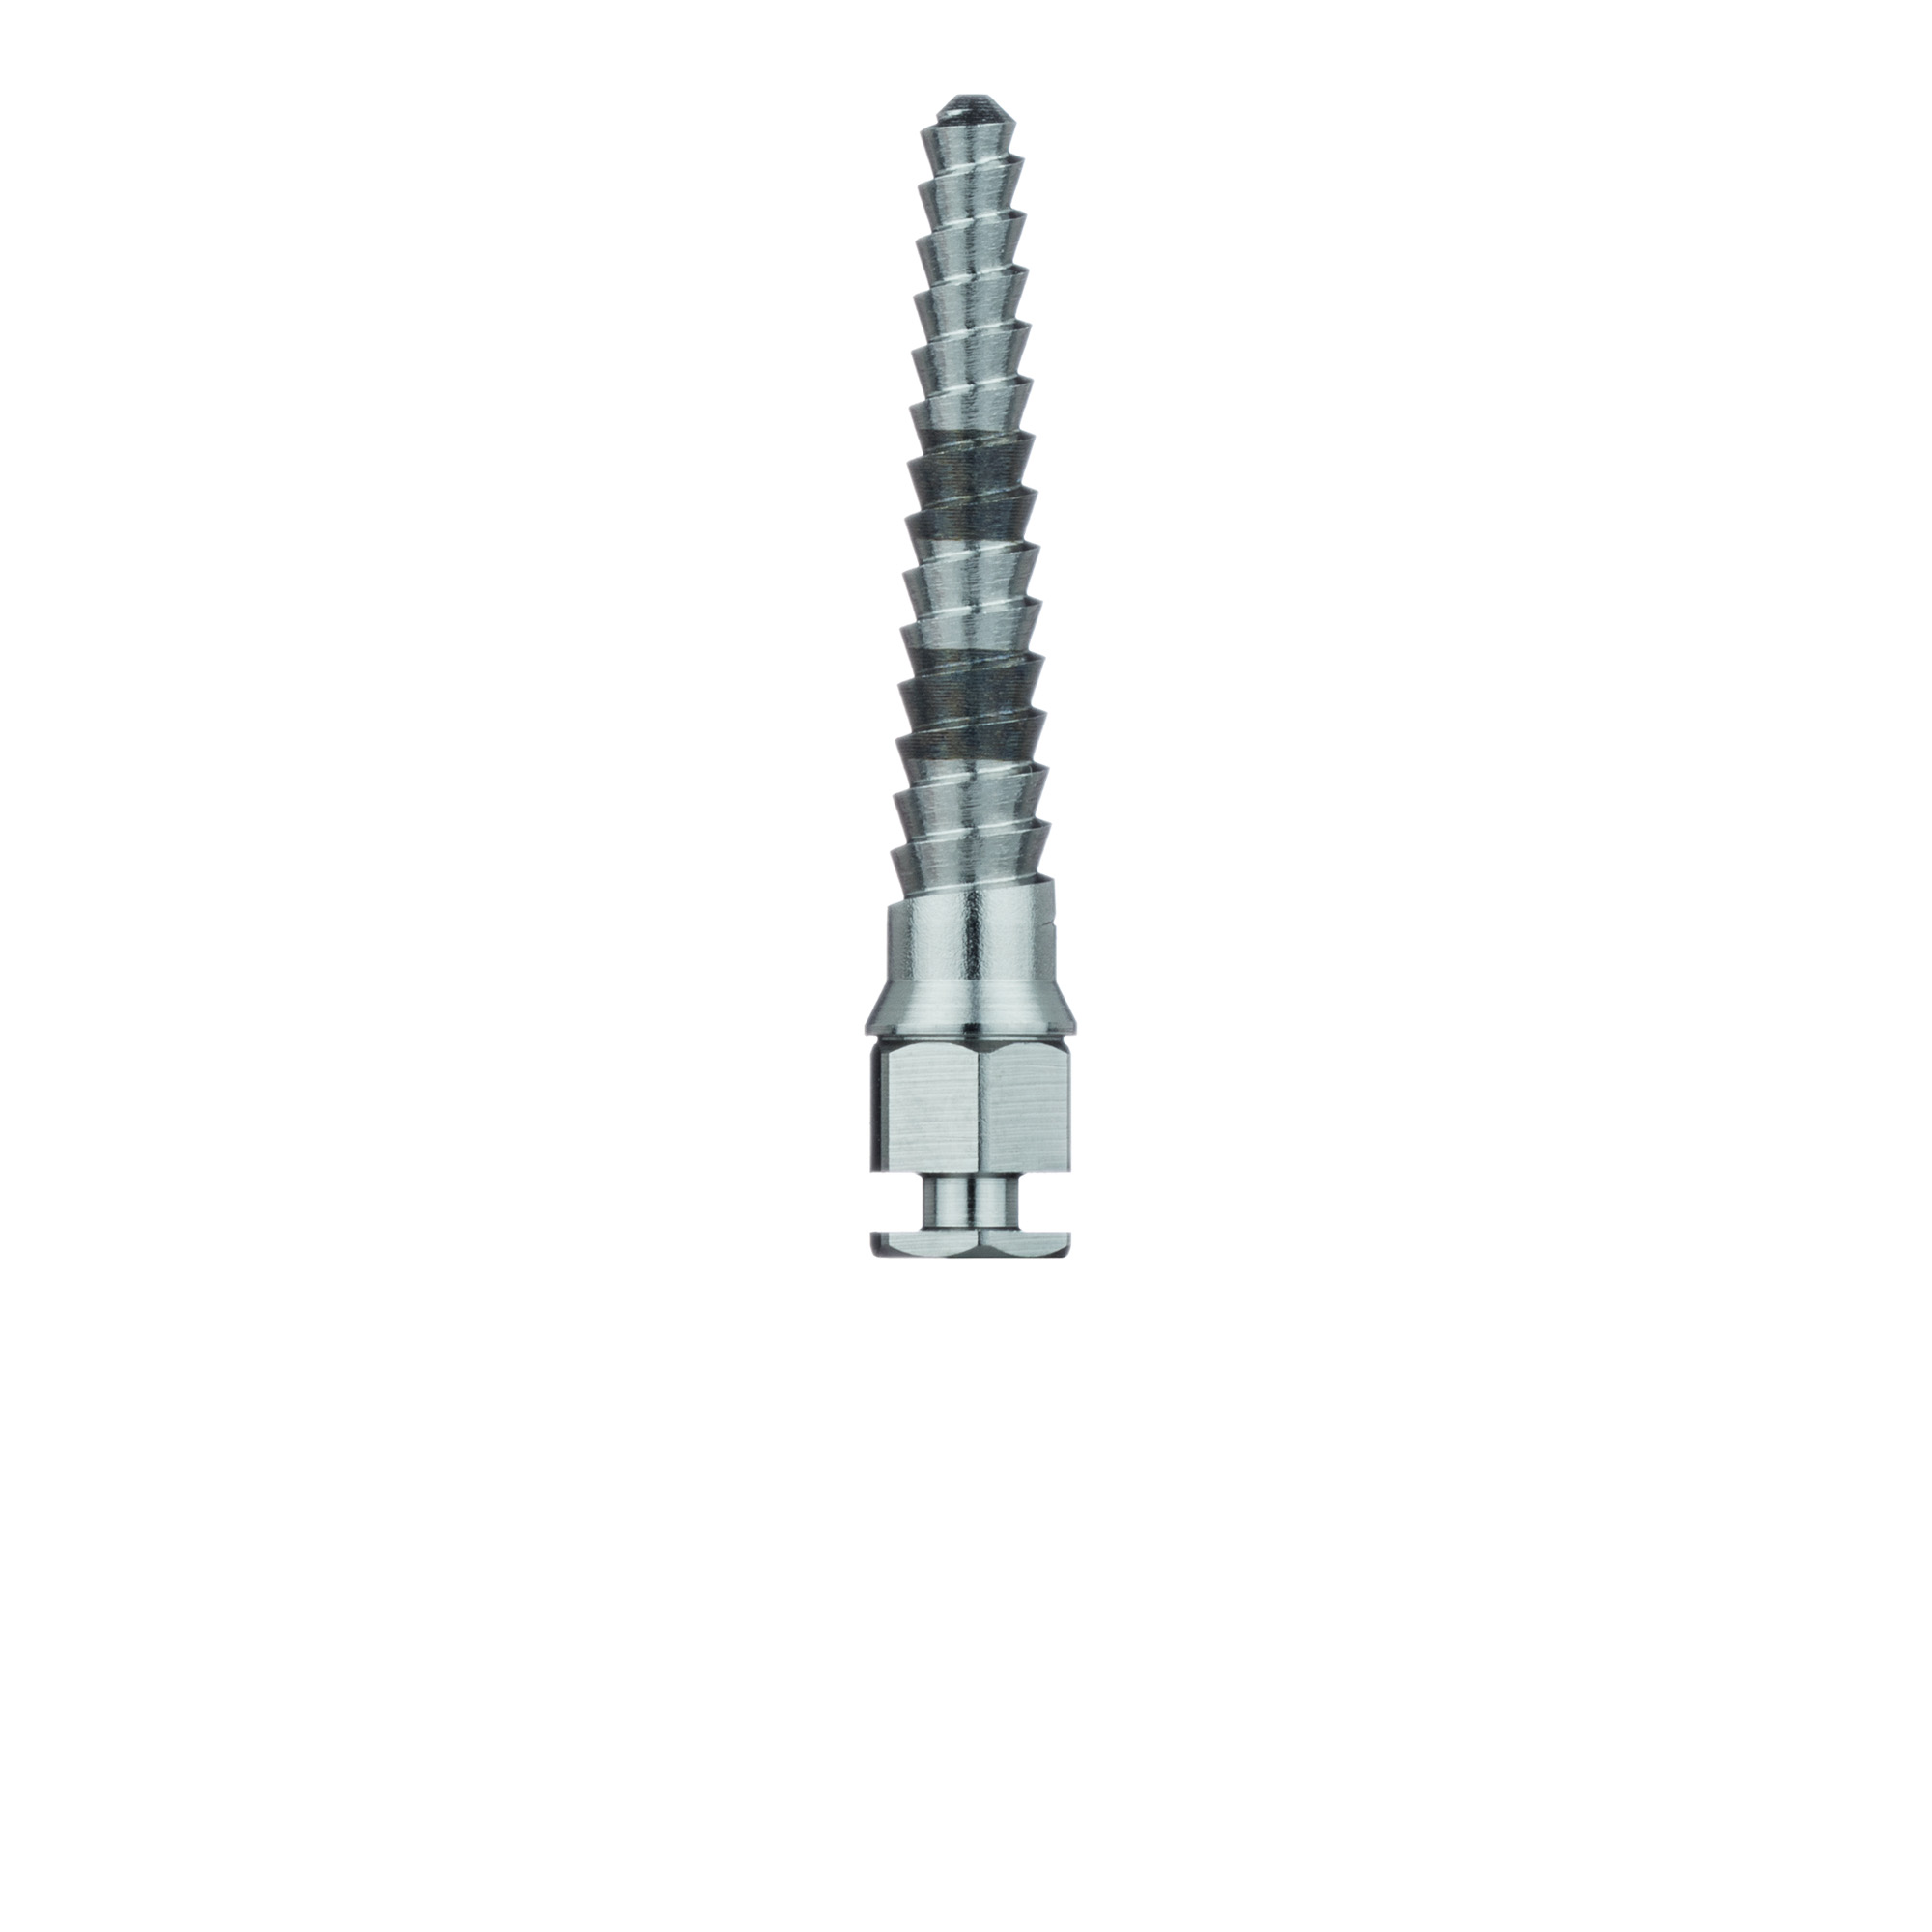 C1005-031 Surgery, Expansion Spreader, 3.1mm X 15mm